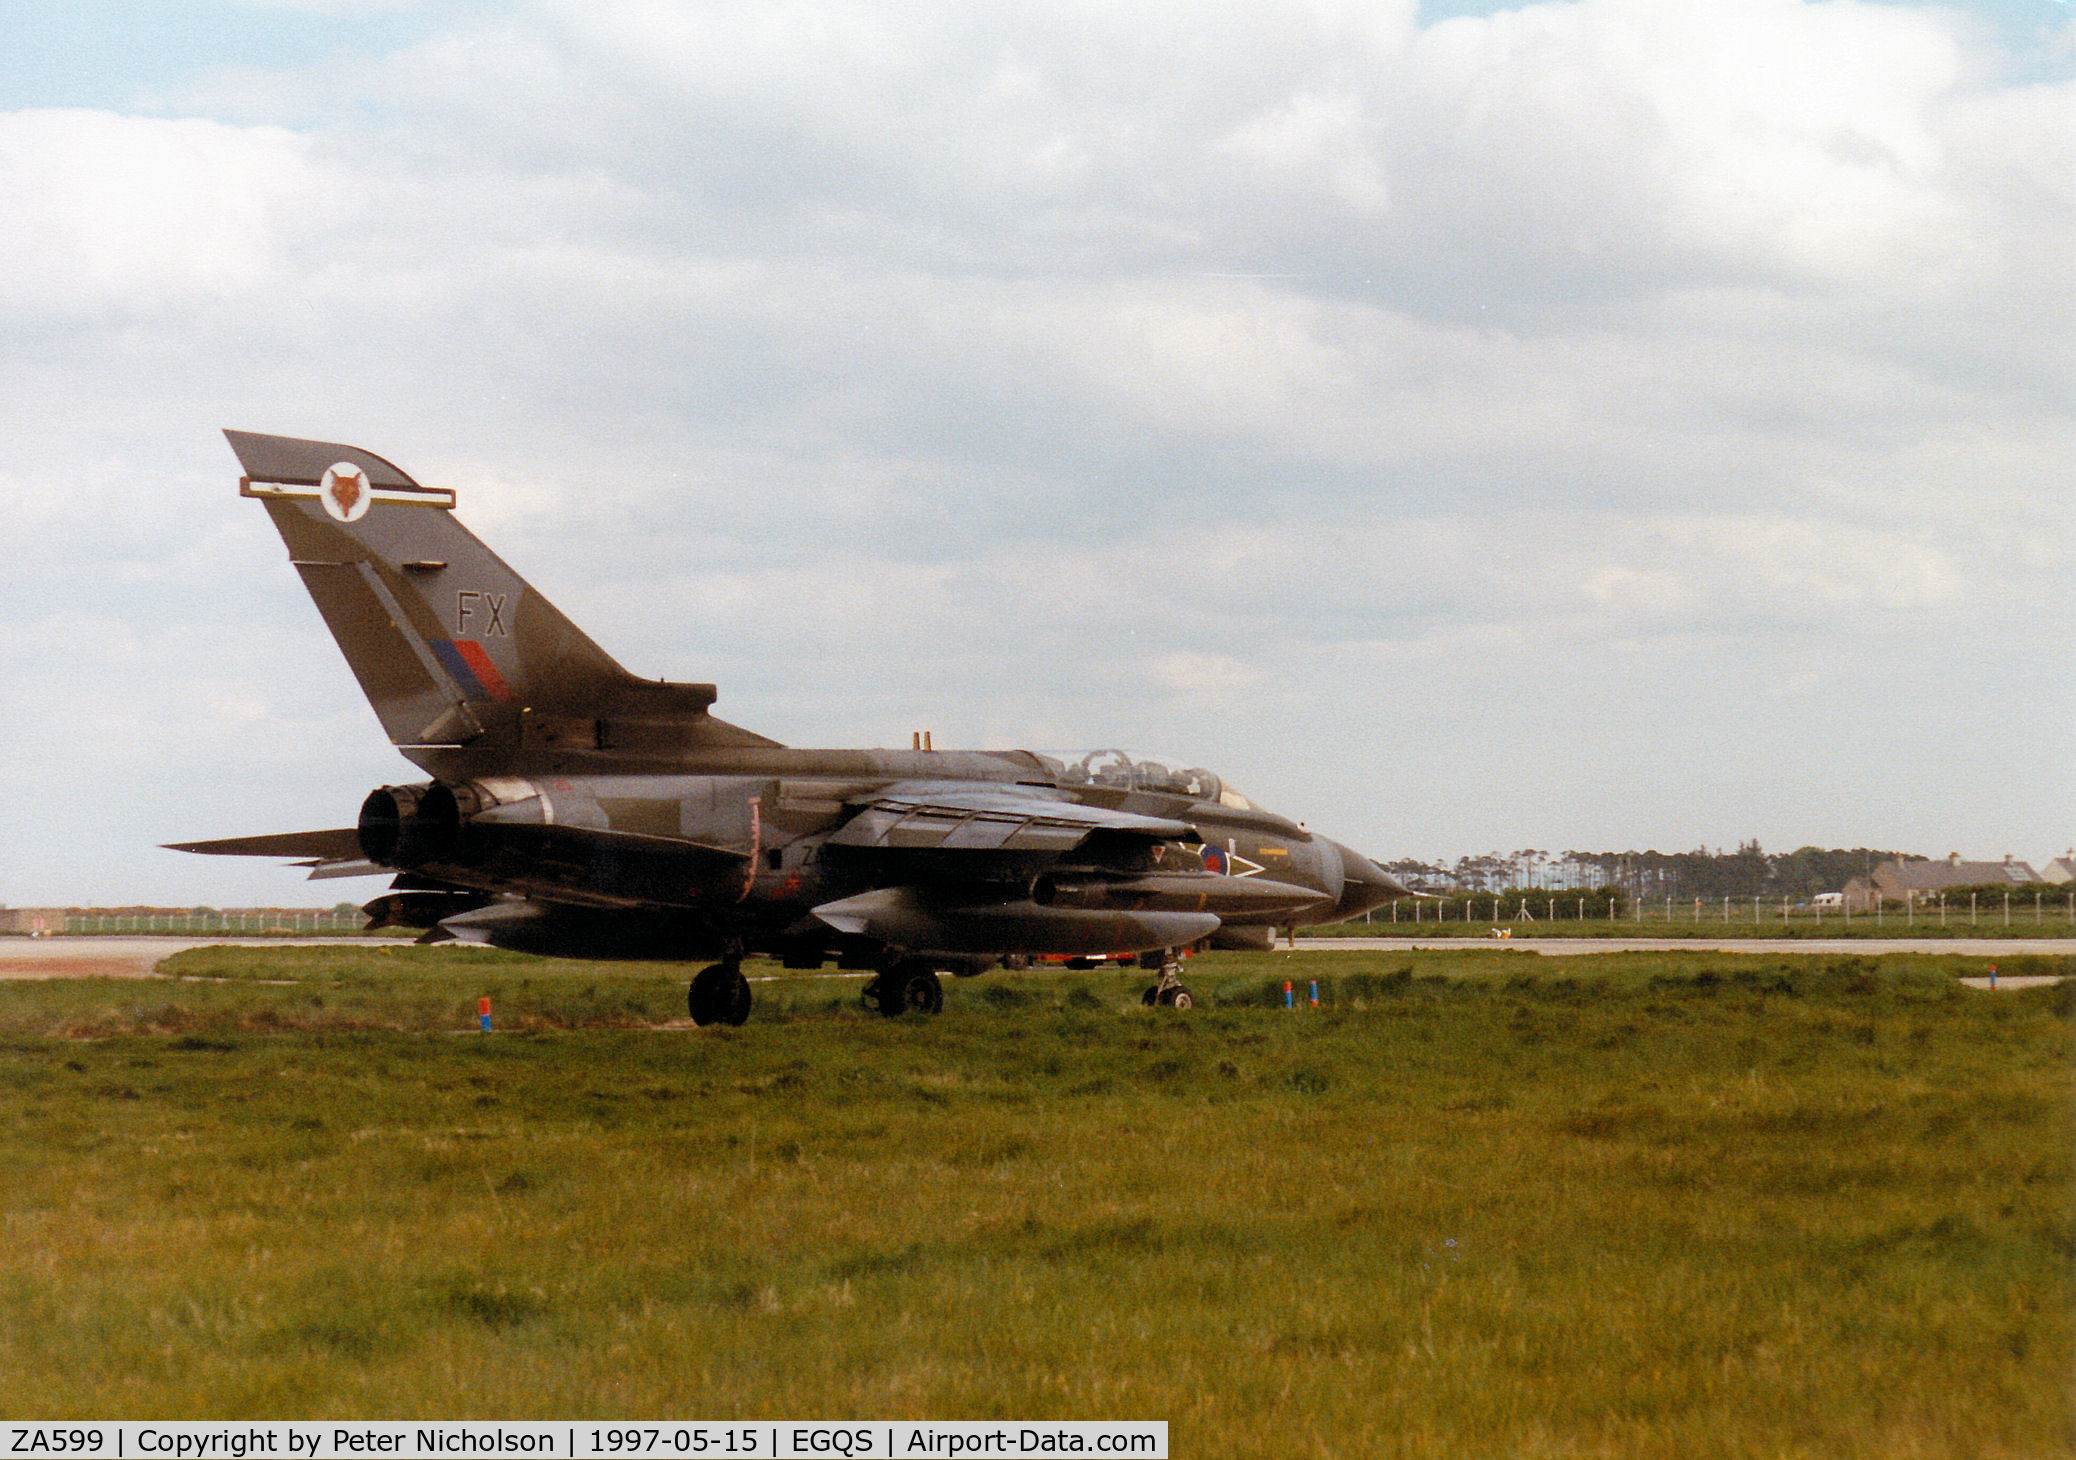 ZA599, 1982 Panavia Tornado GR.1 C/N 120/BT025/3063, Tornado GR.1 of 12 Squadron preparing to join Runway 05 at RAF Lossiemouth in the Summer of 1997.